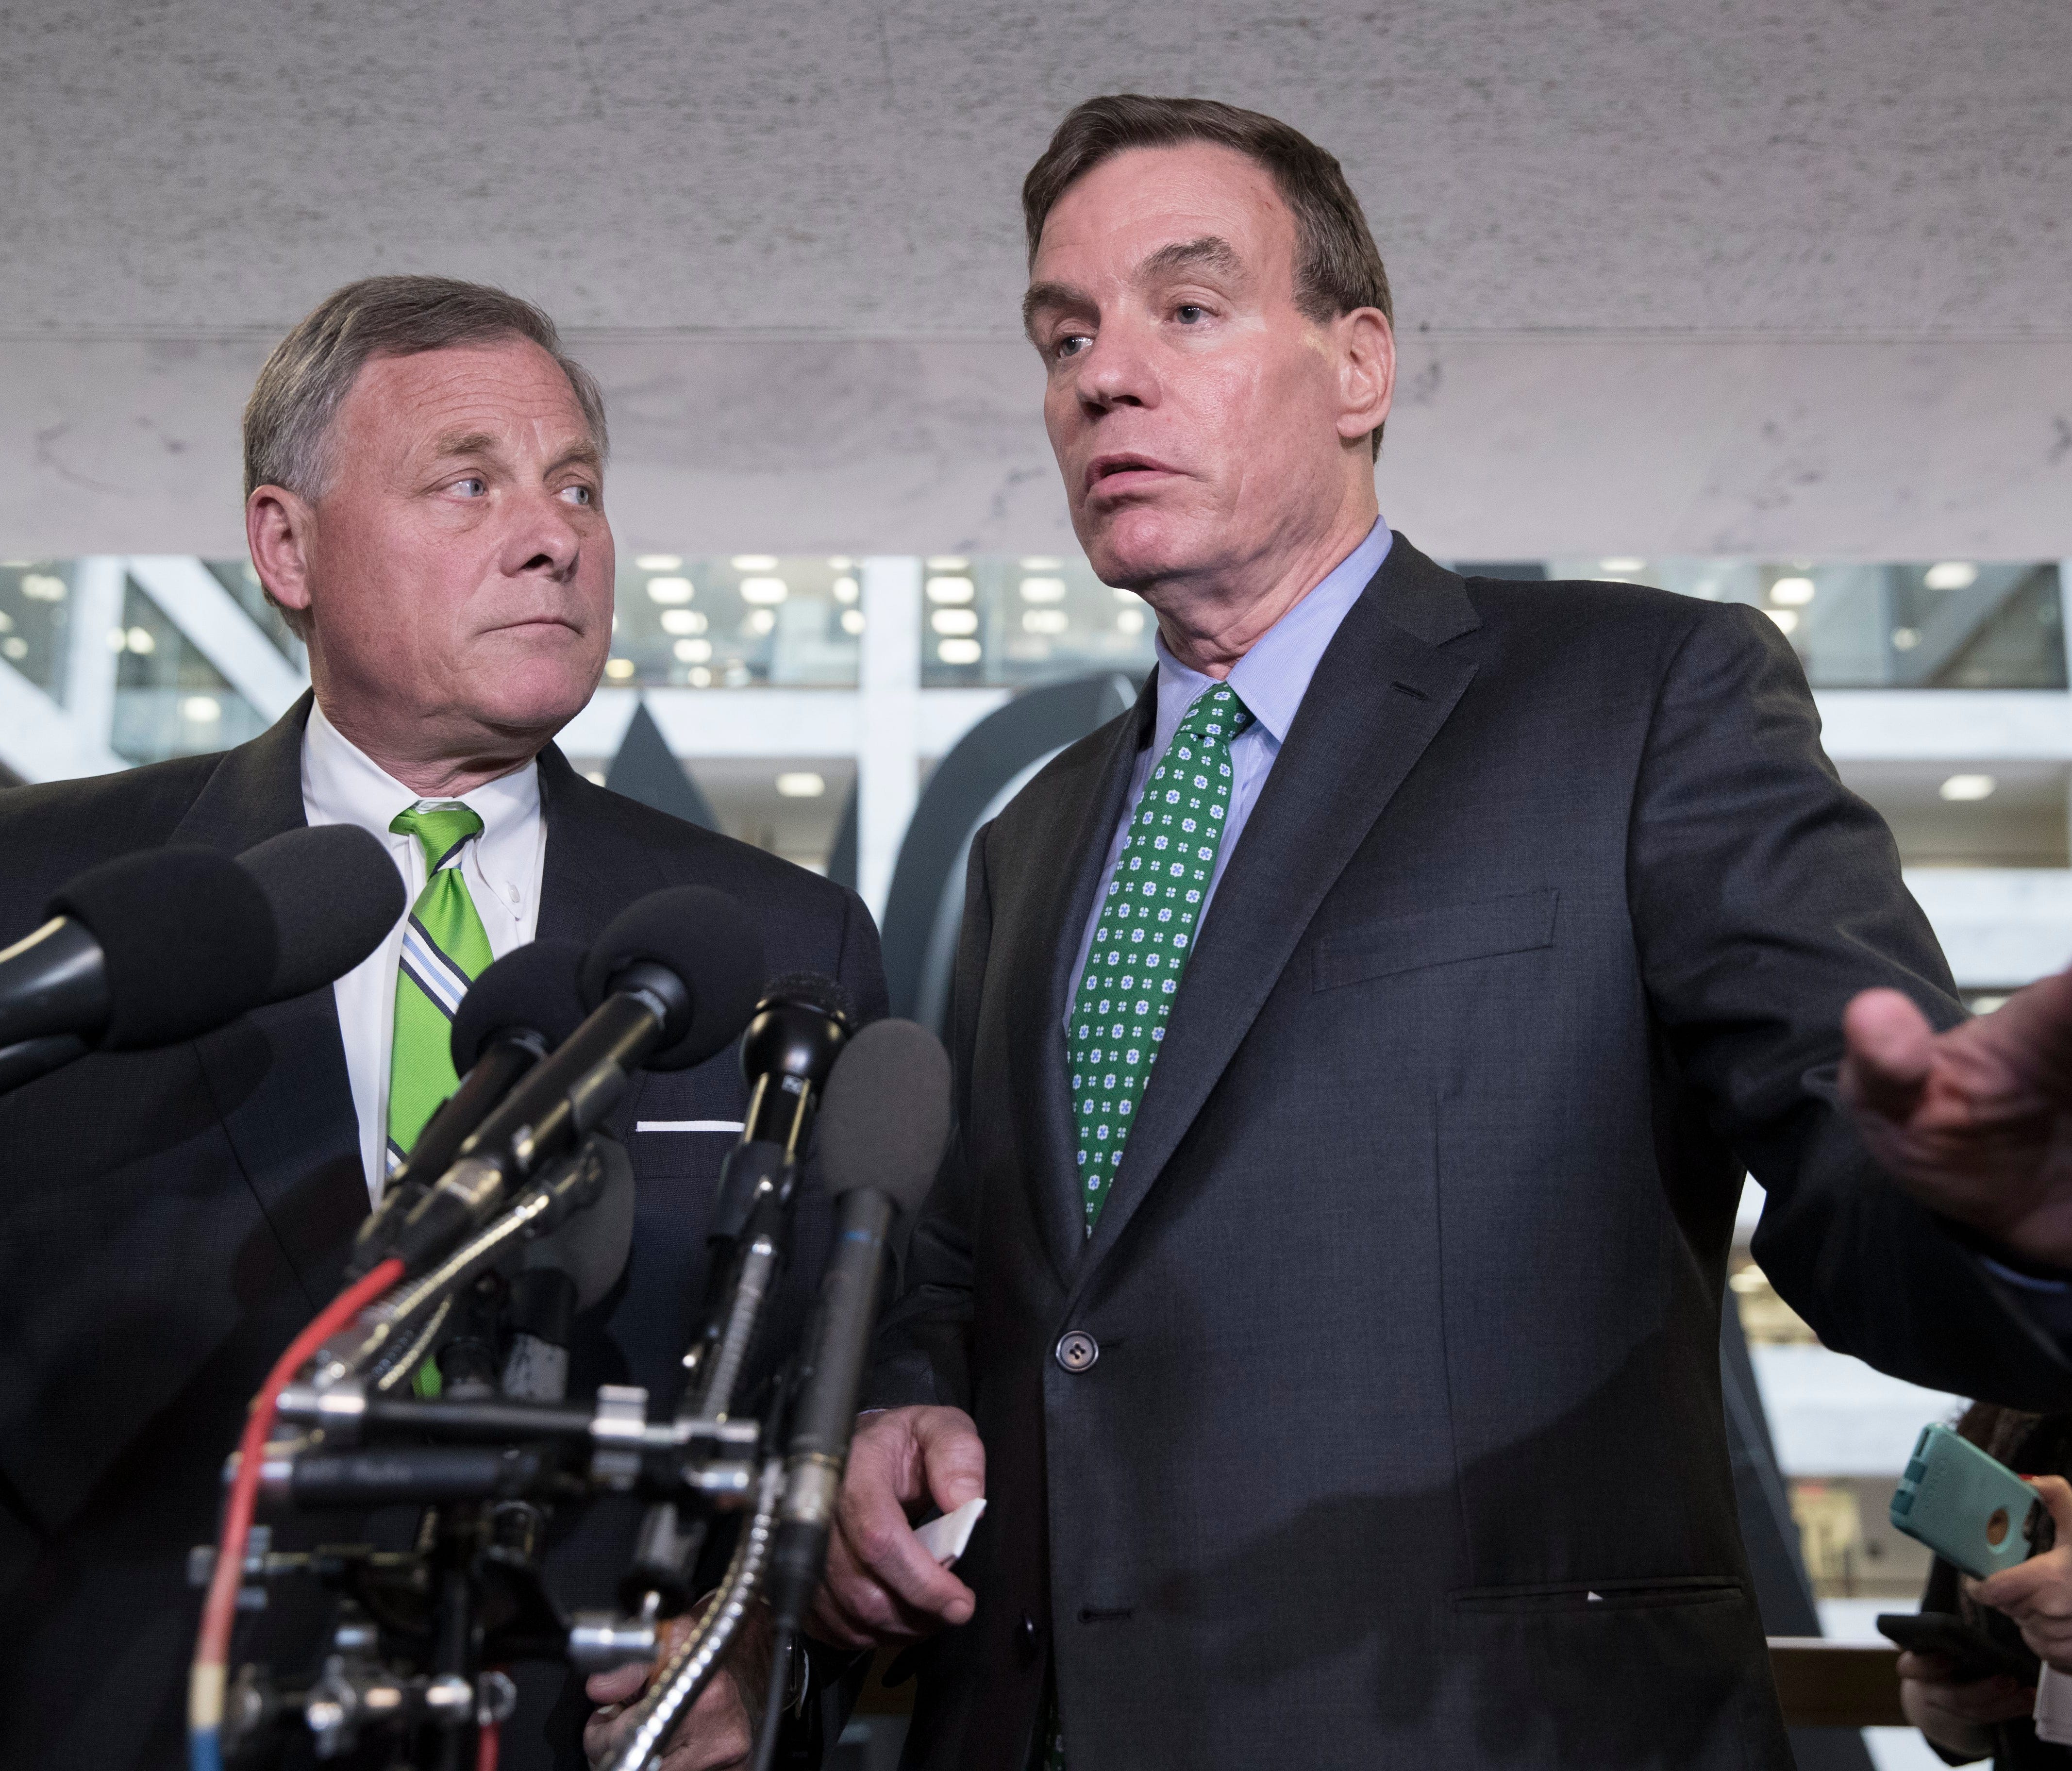 Sen. Mark Warner, the top Democrat on the Senate Intelligence Committee, and Sen. Richard Burr, chairman of the committee, speak to members of the media on Capitol Hill on May 23, 2017.